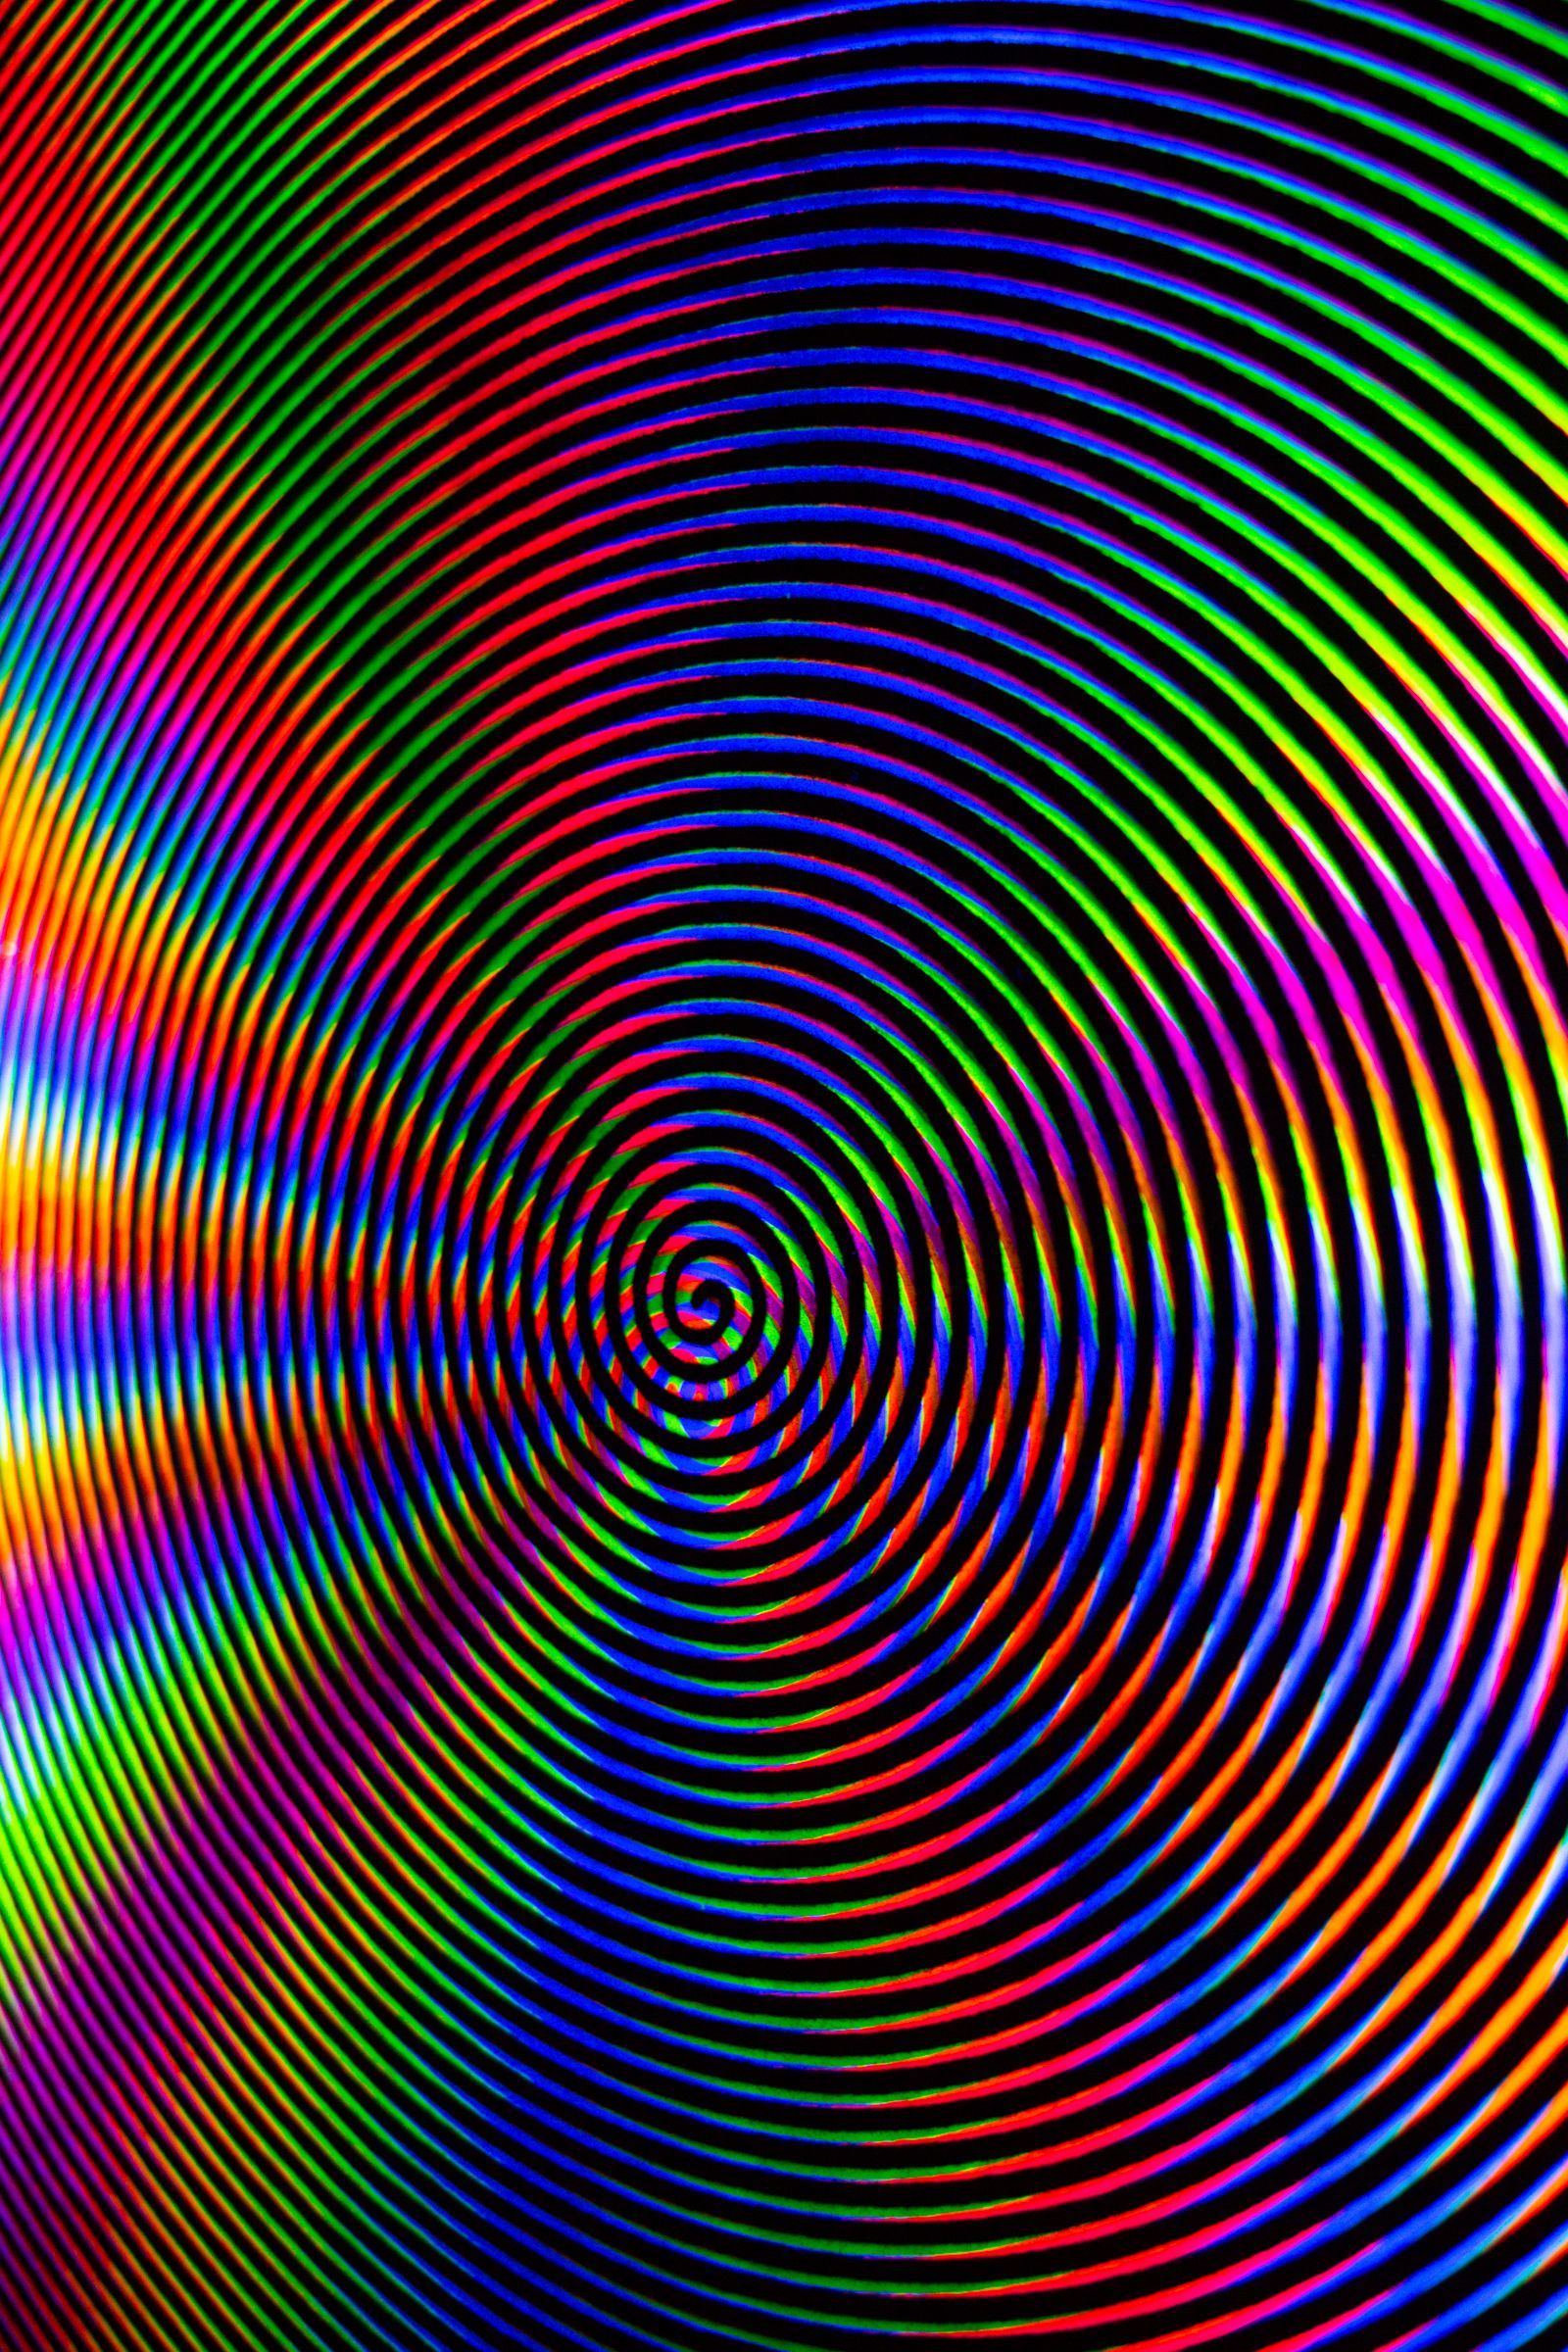 An abstract image of concentric circles in rainbow colors. - Trippy